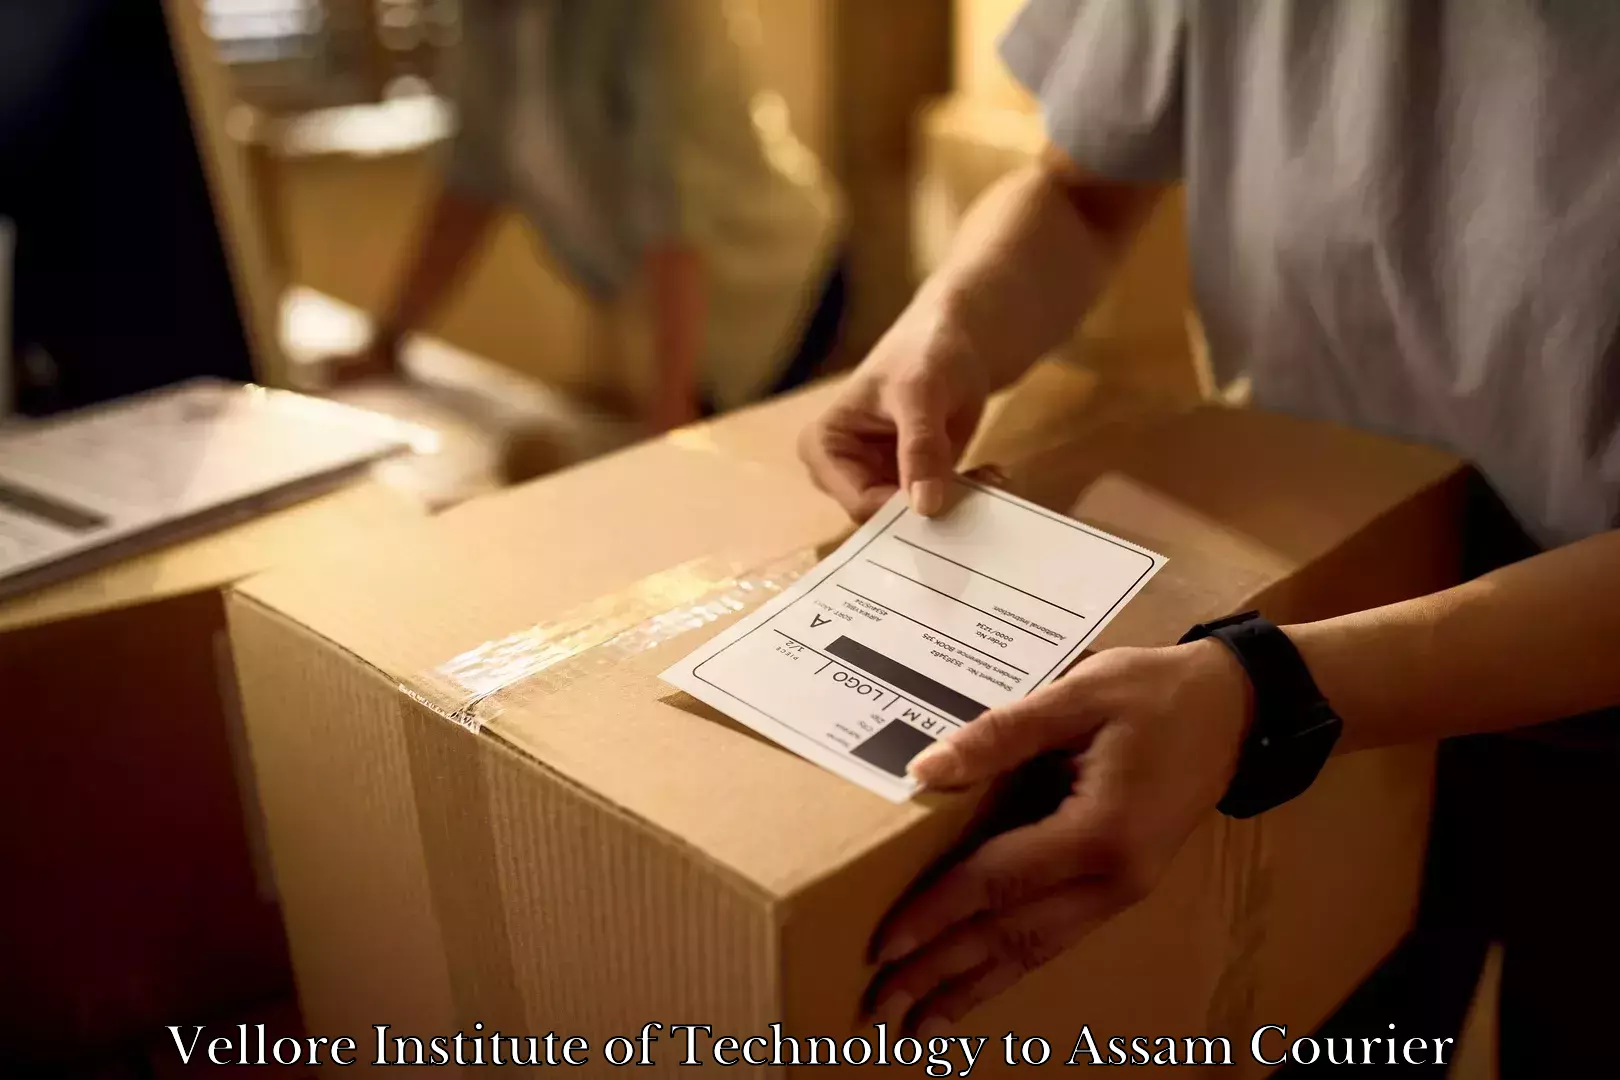 Professional moving company Vellore Institute of Technology to Dhemaji